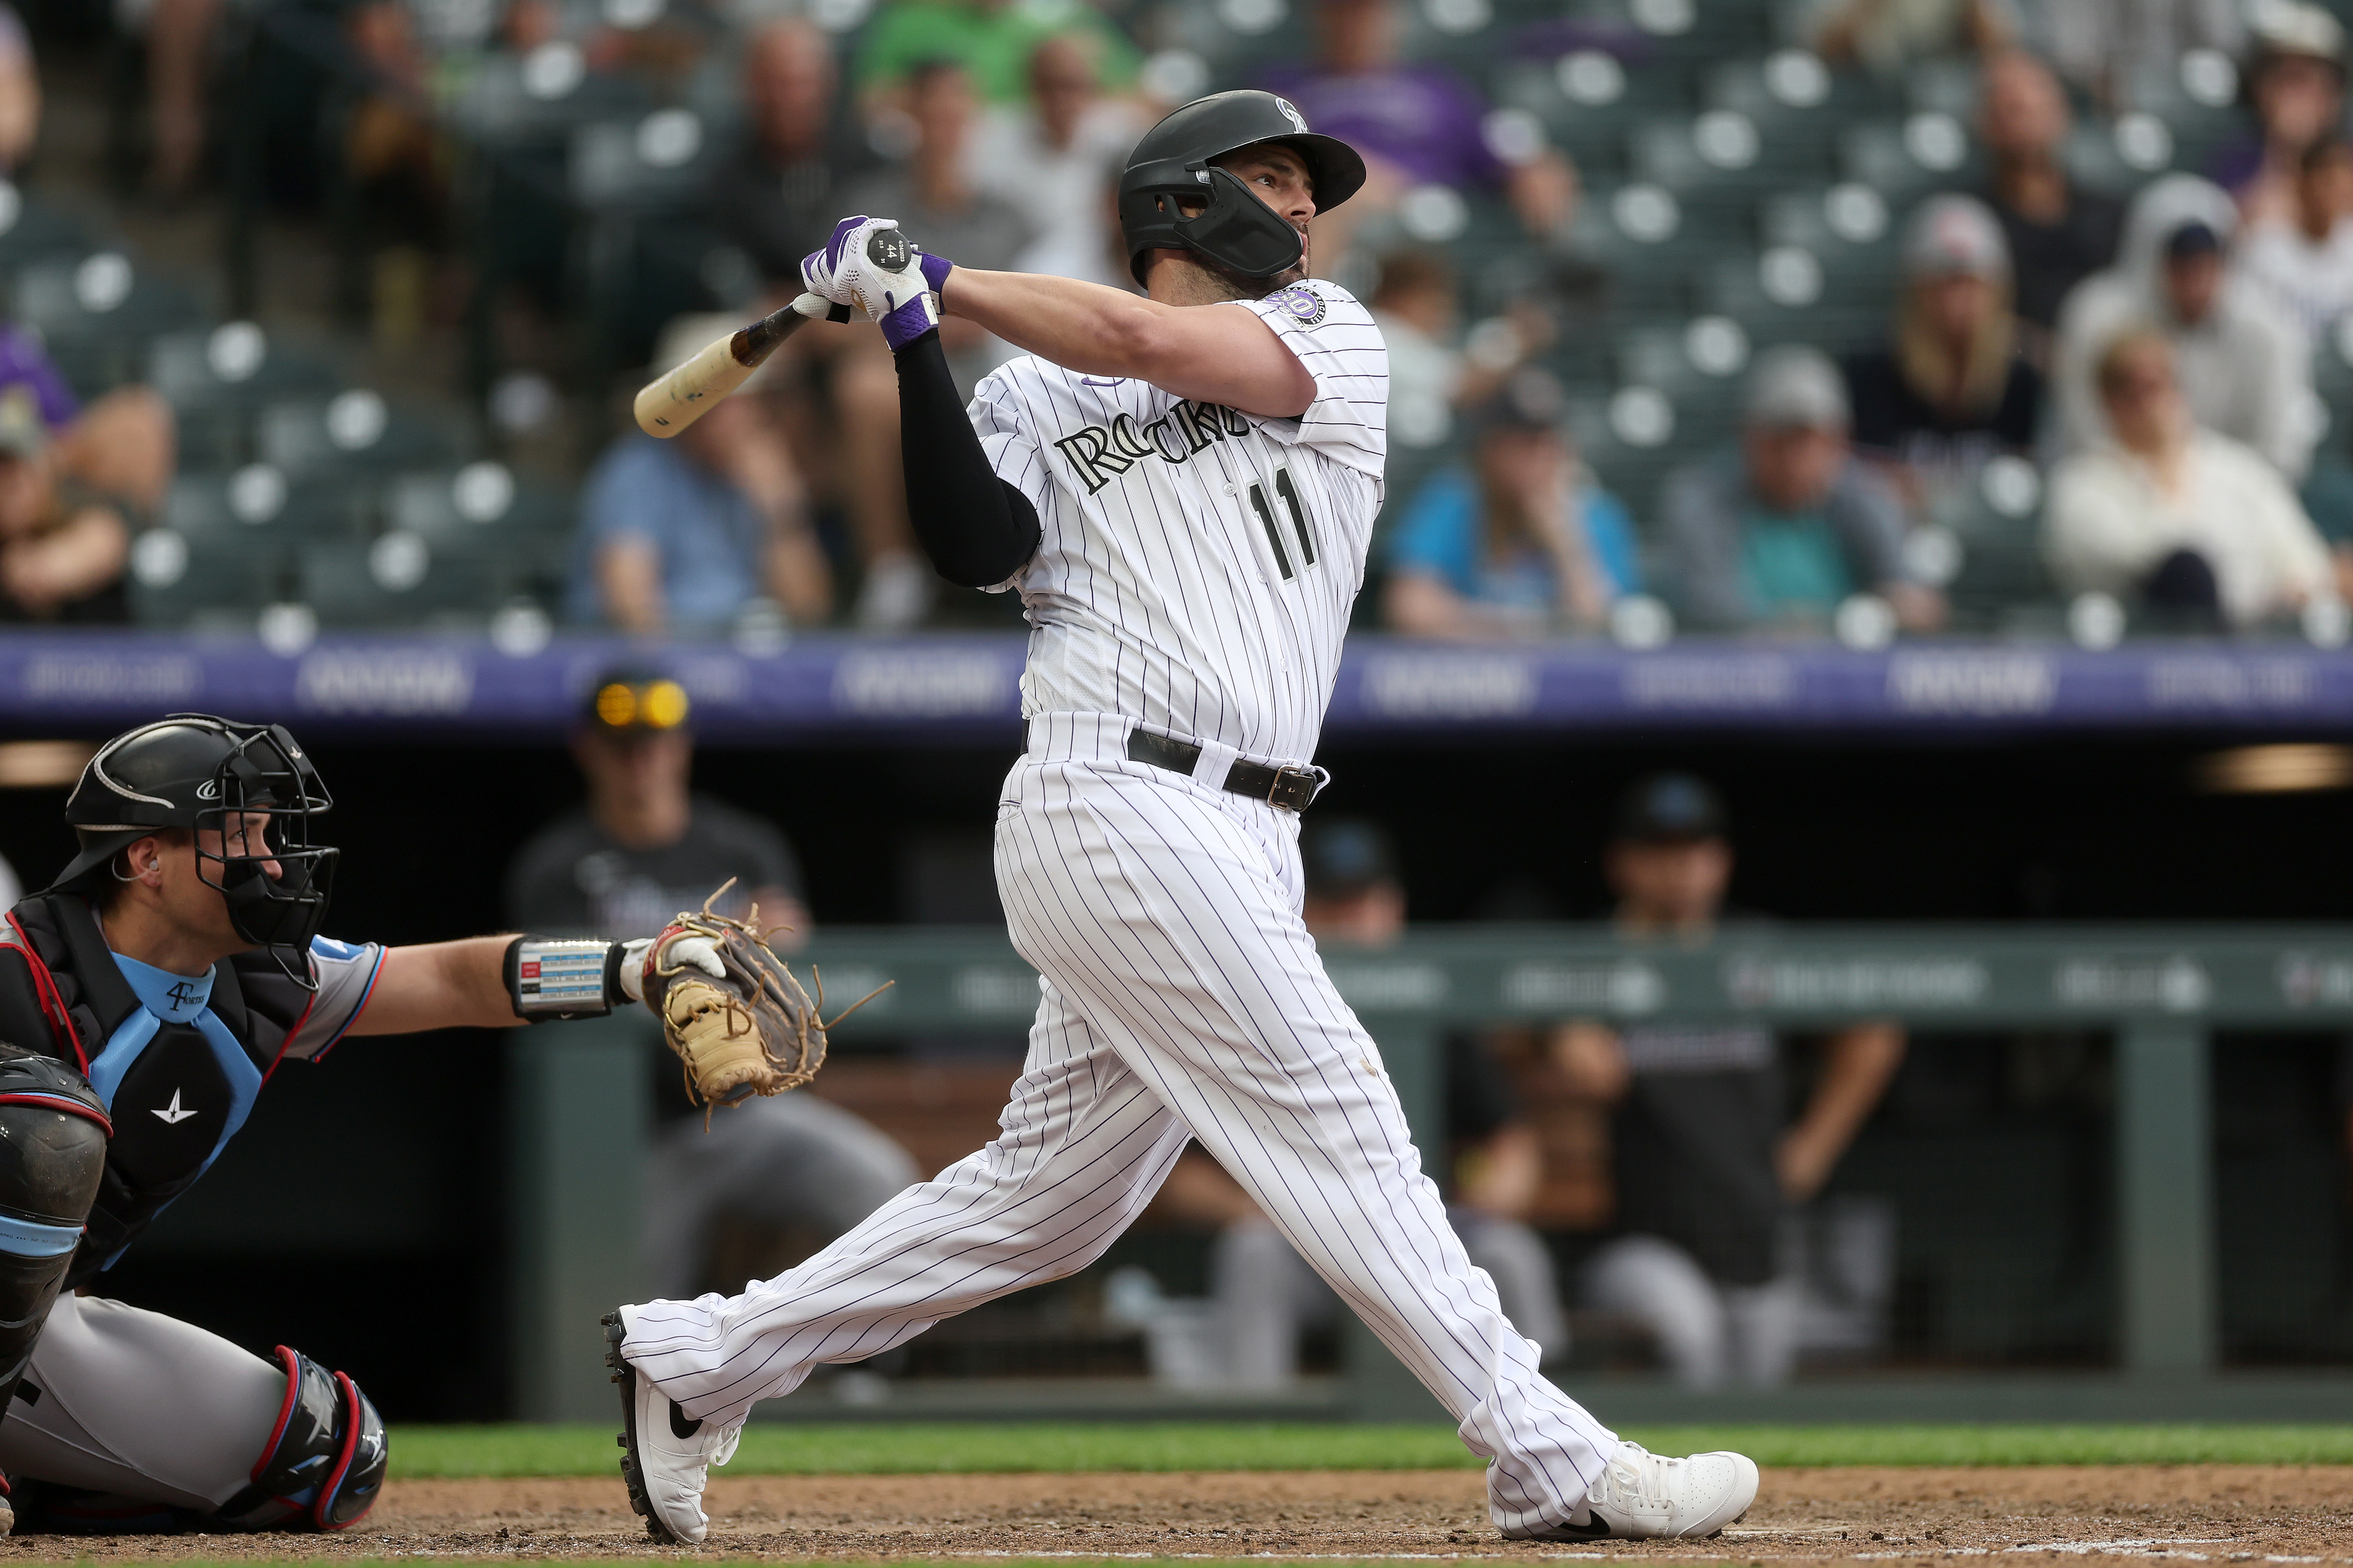 Tovar's single in storm lifts Rockies over Marlins 7-6 after blown